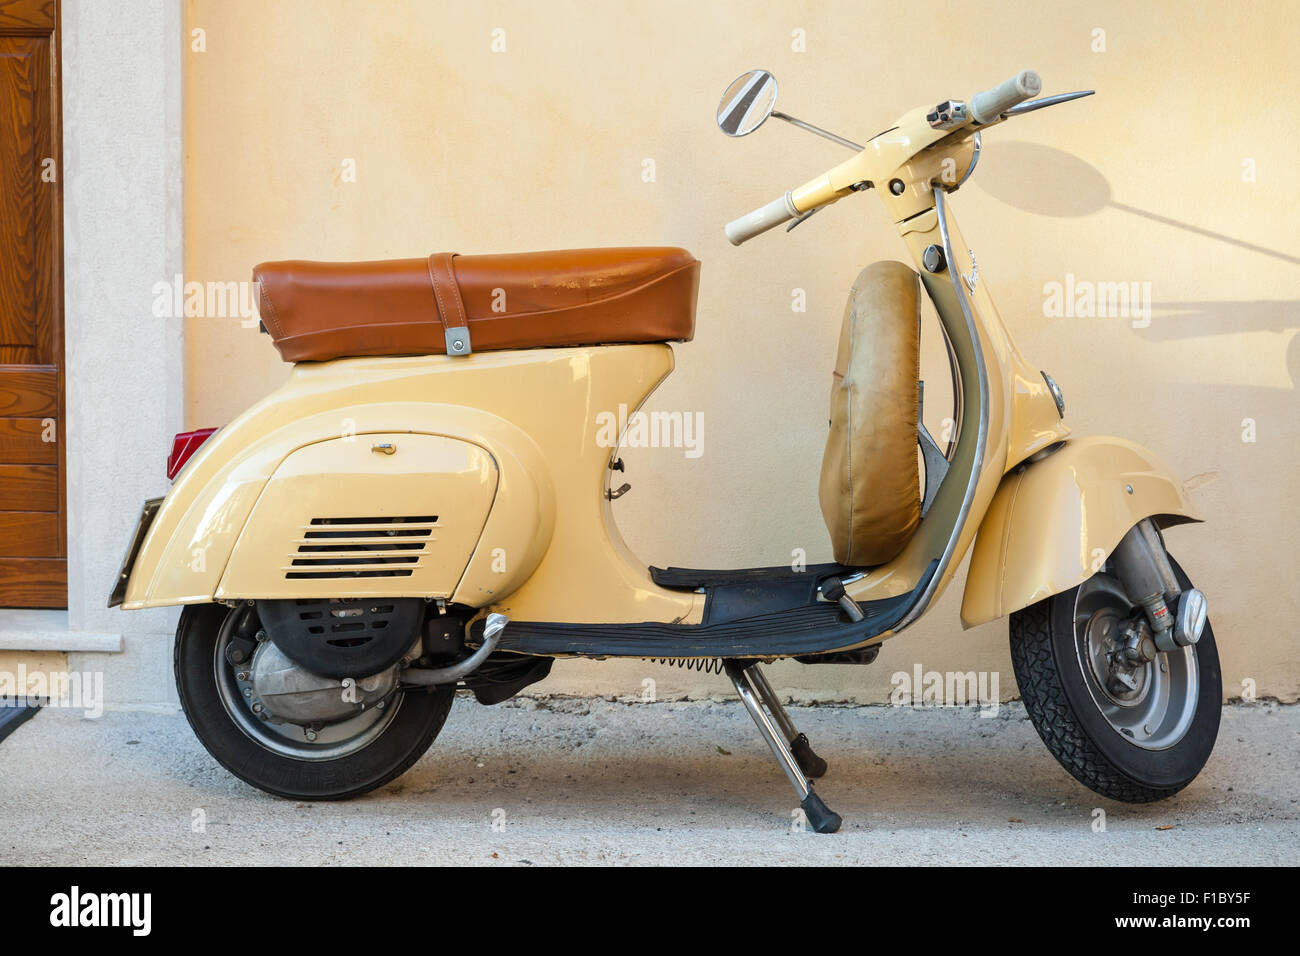 Gaeta, Italy - August 19, 2015: Classic yellow Vespa scooter stands parked near the wall Stock Photo